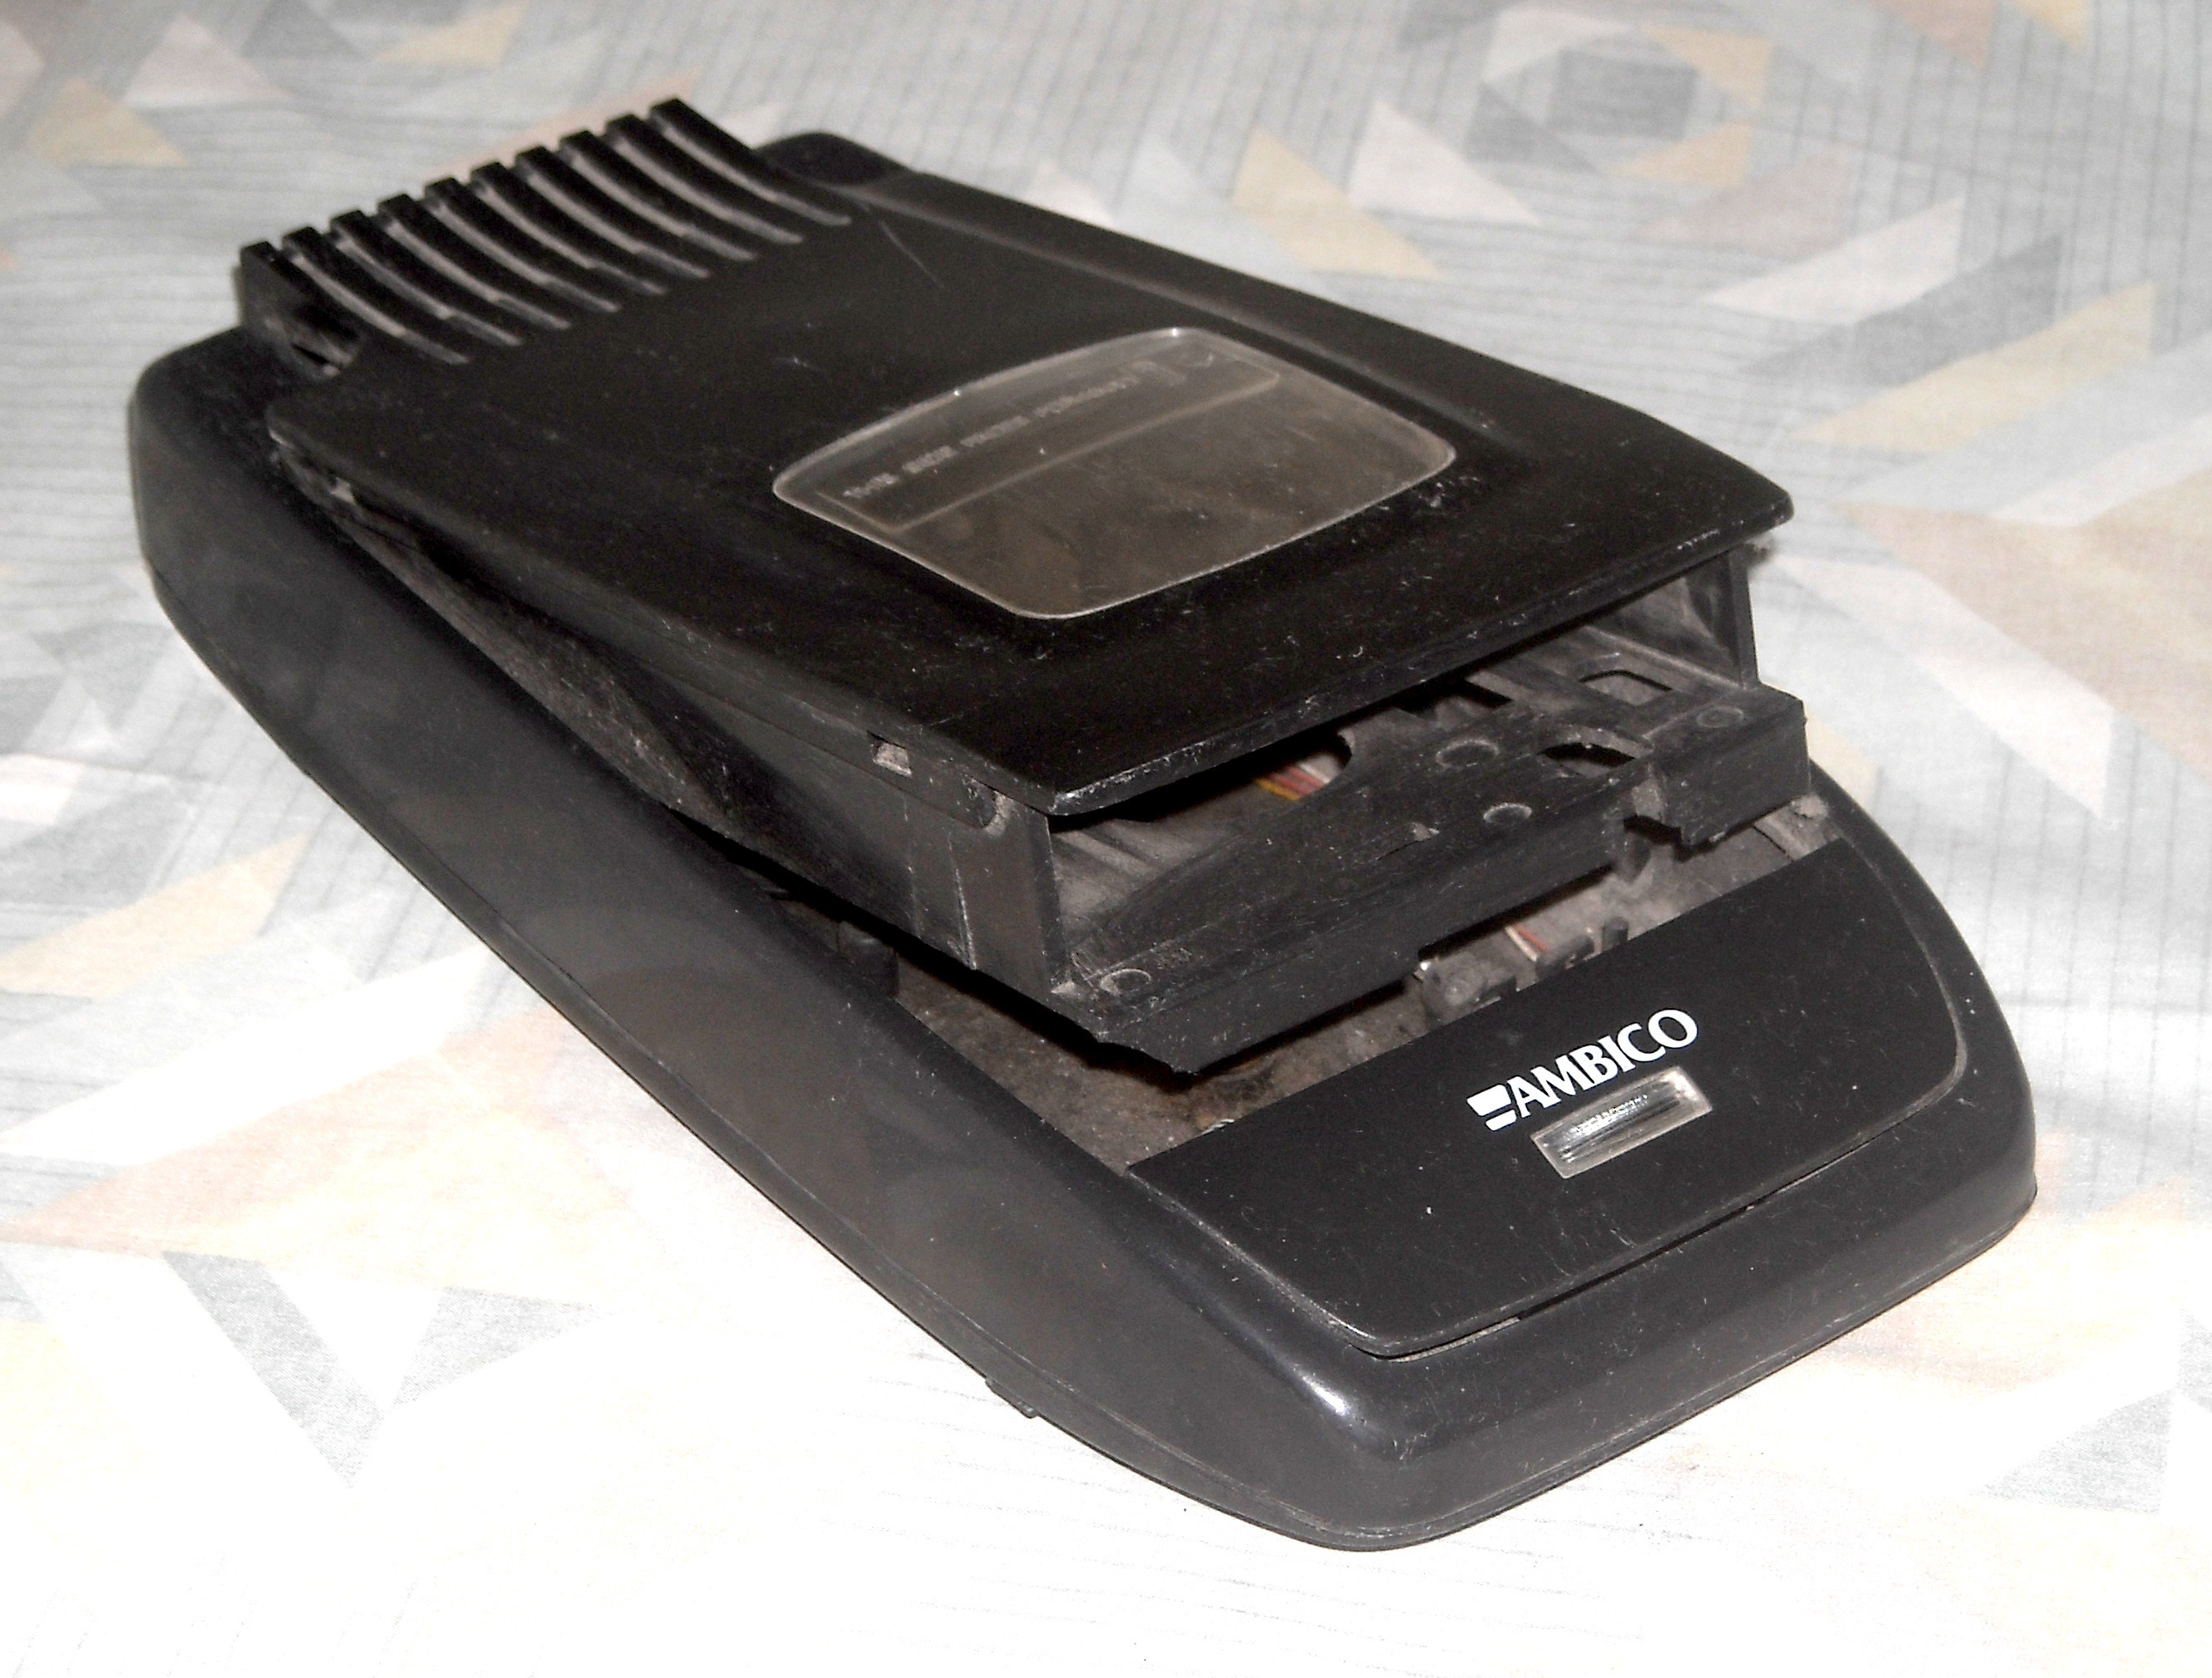 For those who don't know - this is a VHS tape rewinder.